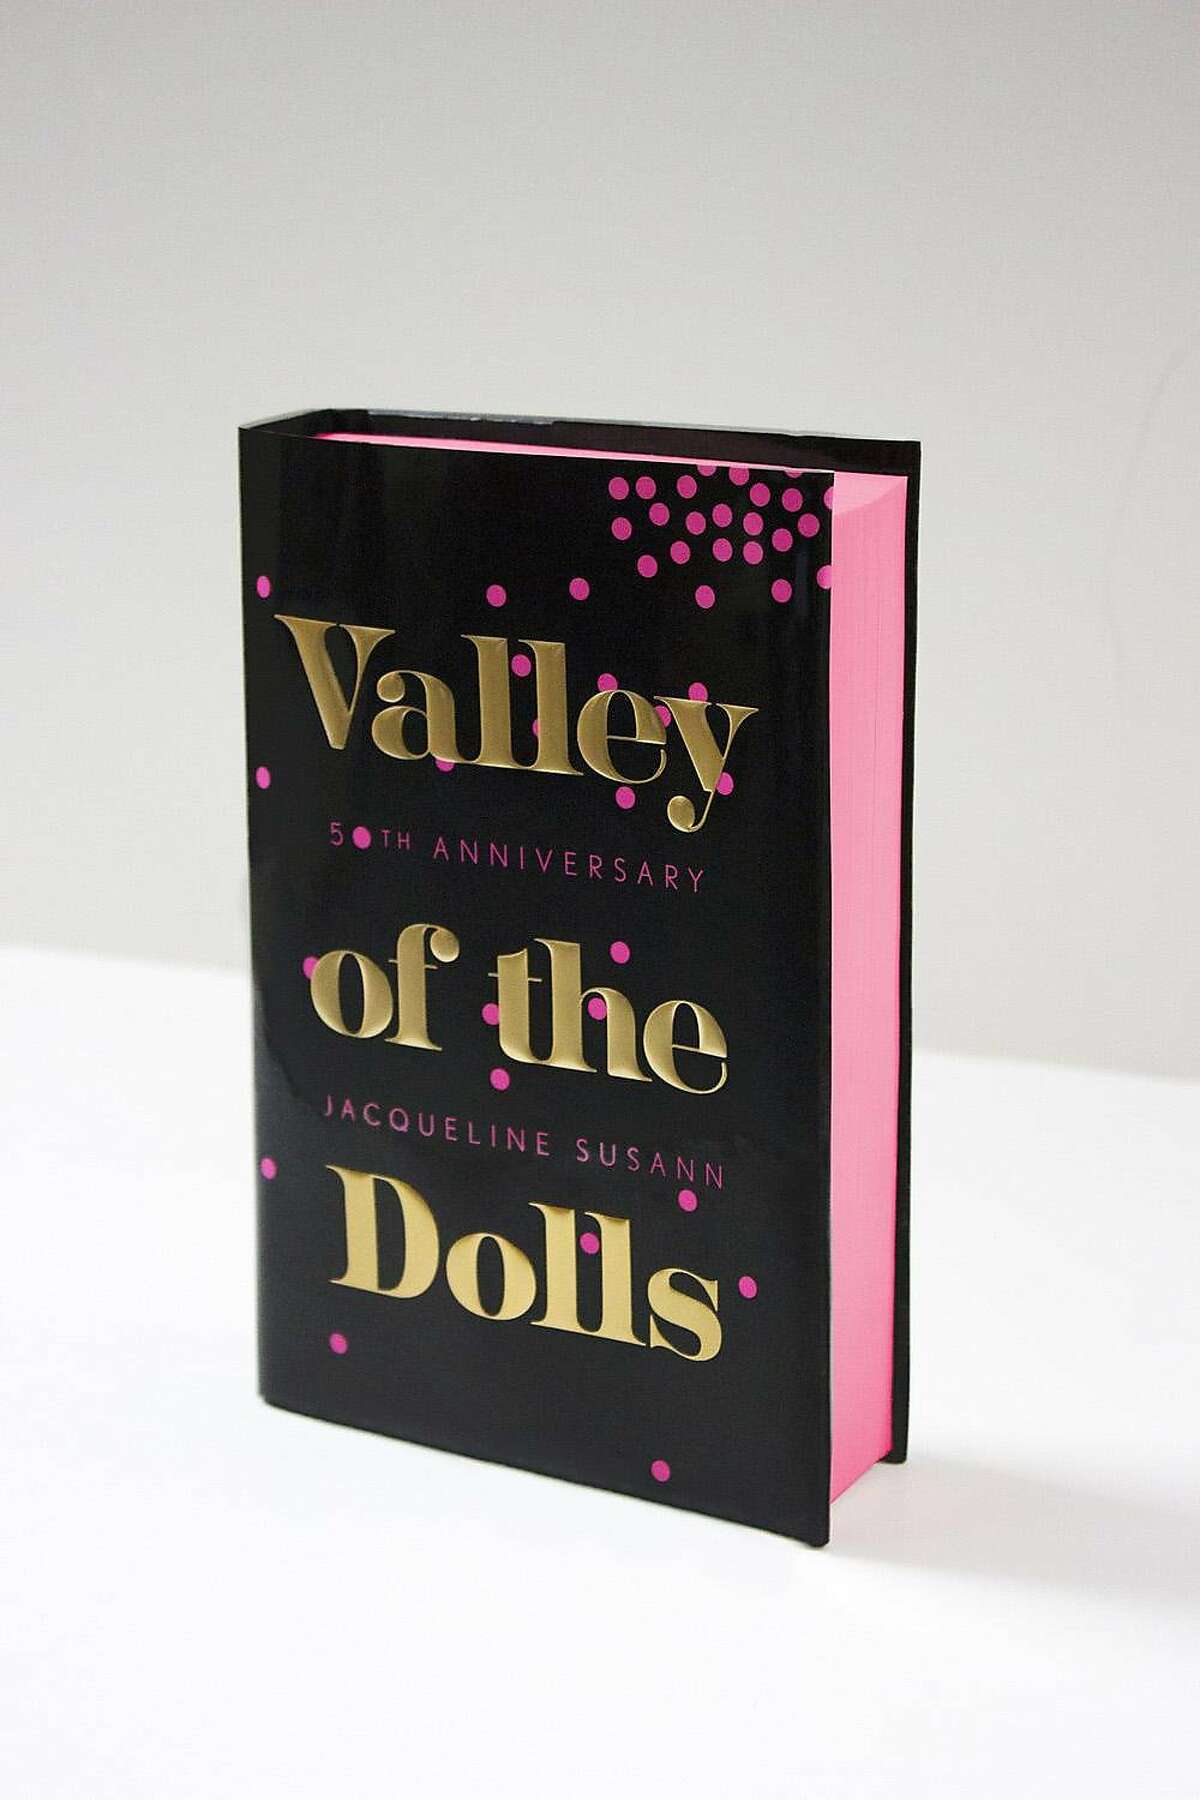 Valley of the Dolls 50th Anniversary Edition (Hardcover)�by�Jacqueline Susann